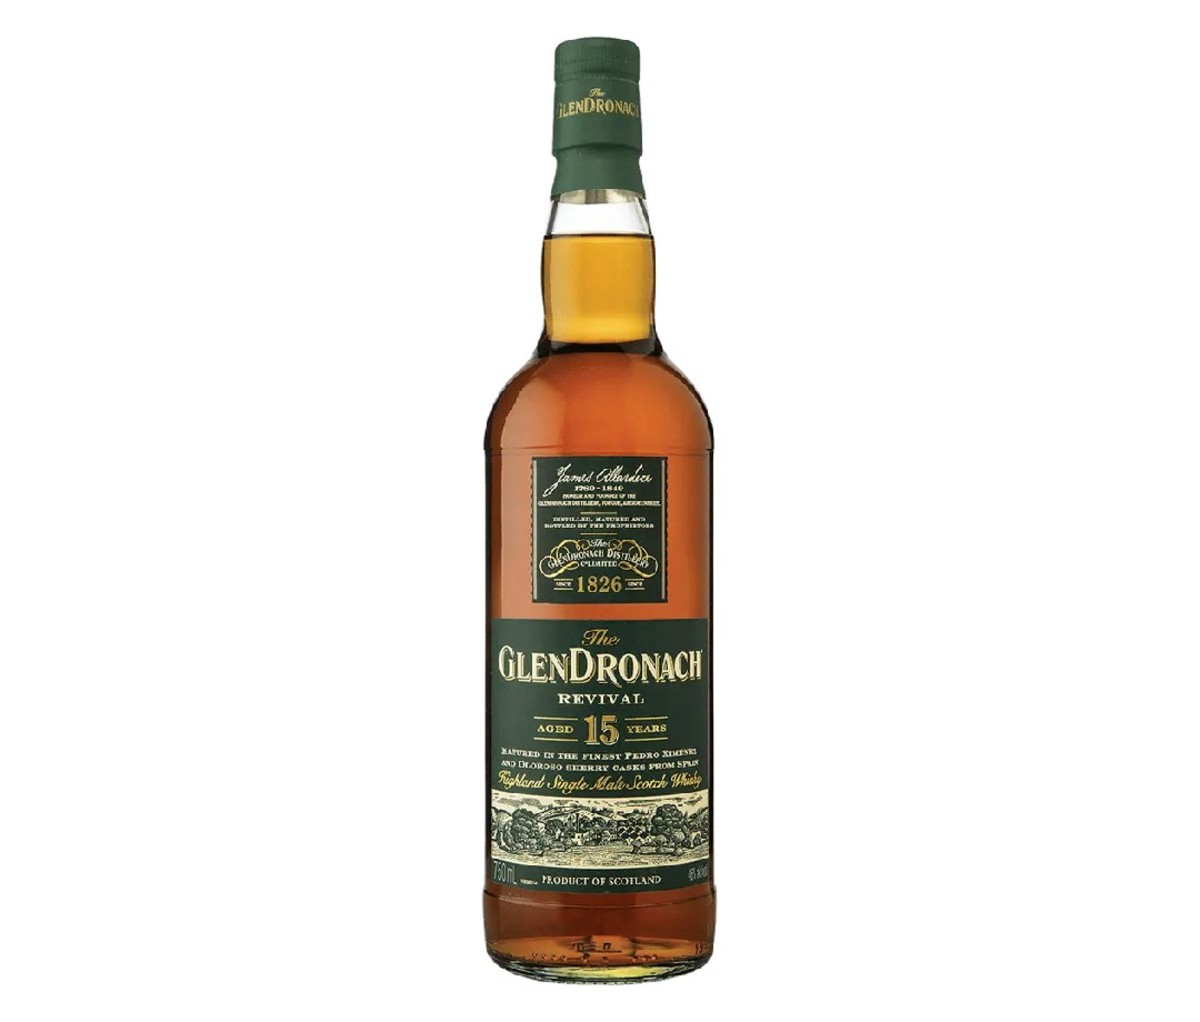 A bottle of GlenDronach 15 Year Revival whisky.